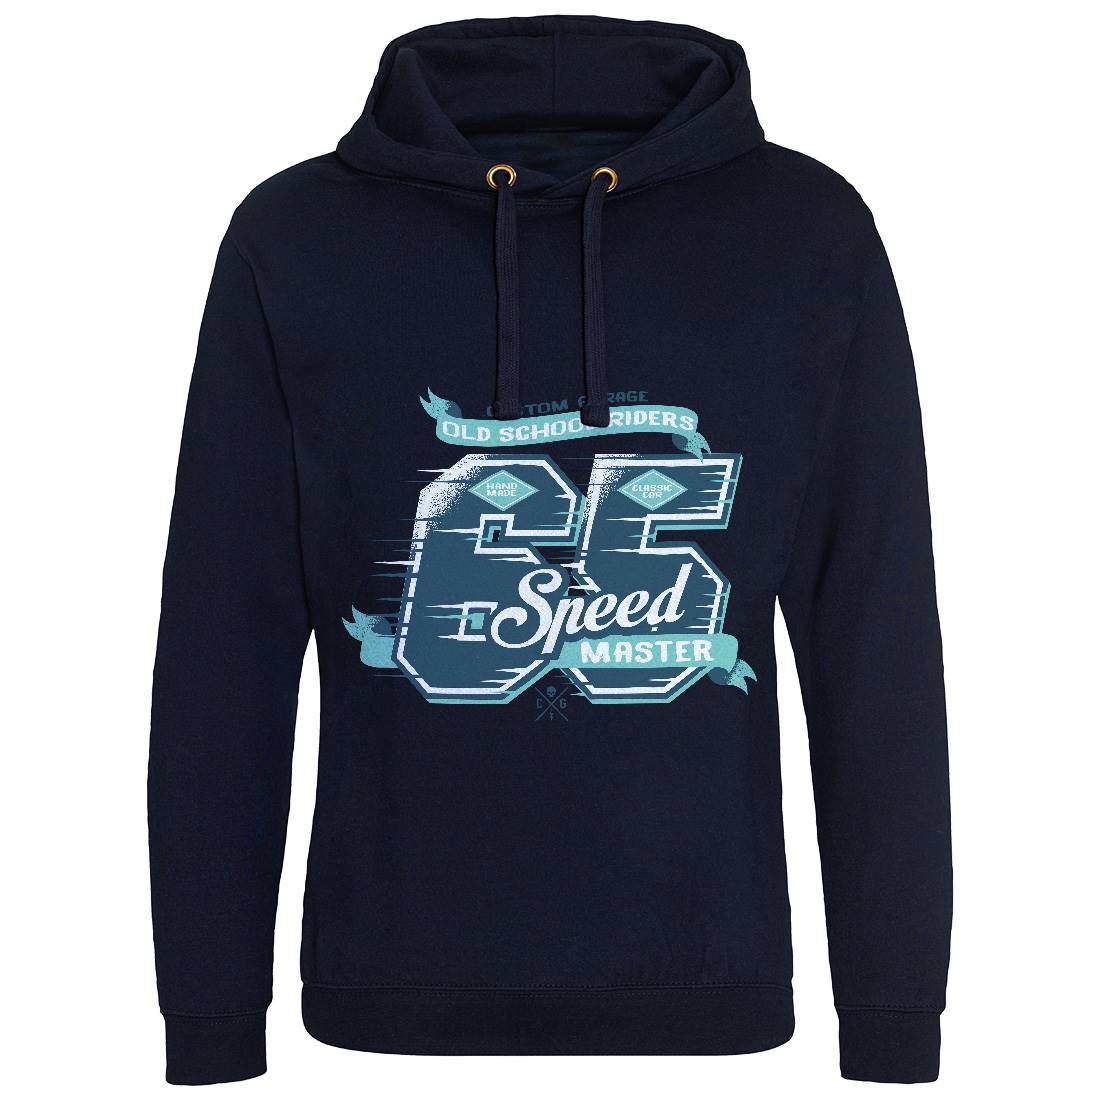 65 Speed Mens Hoodie Without Pocket Motorcycles A982